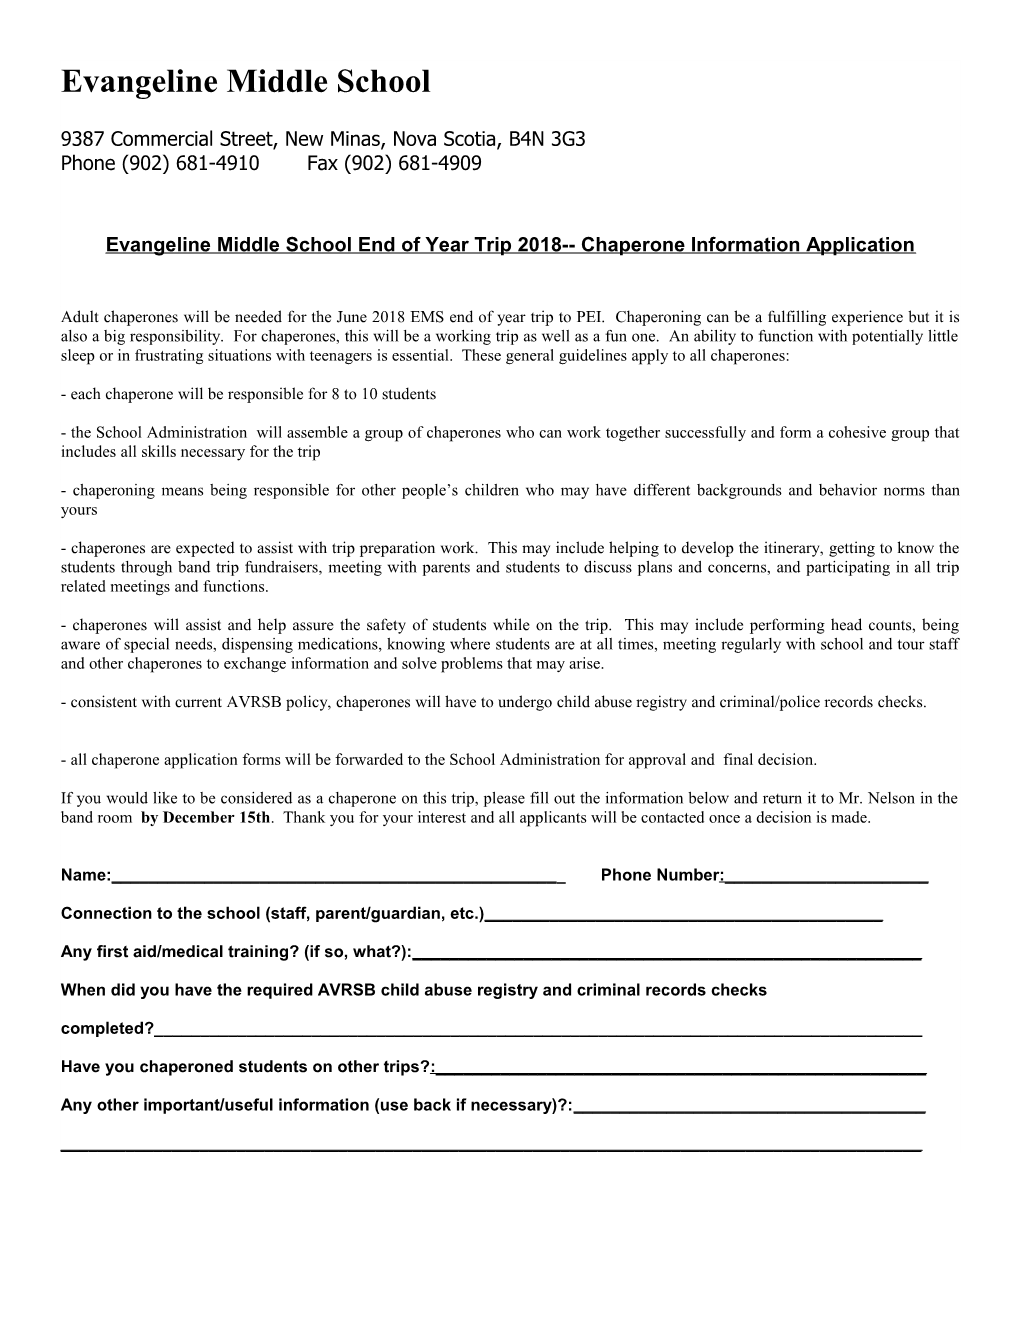 Evangeline Middle School End of Year Trip 2018 Chaperone Information Application